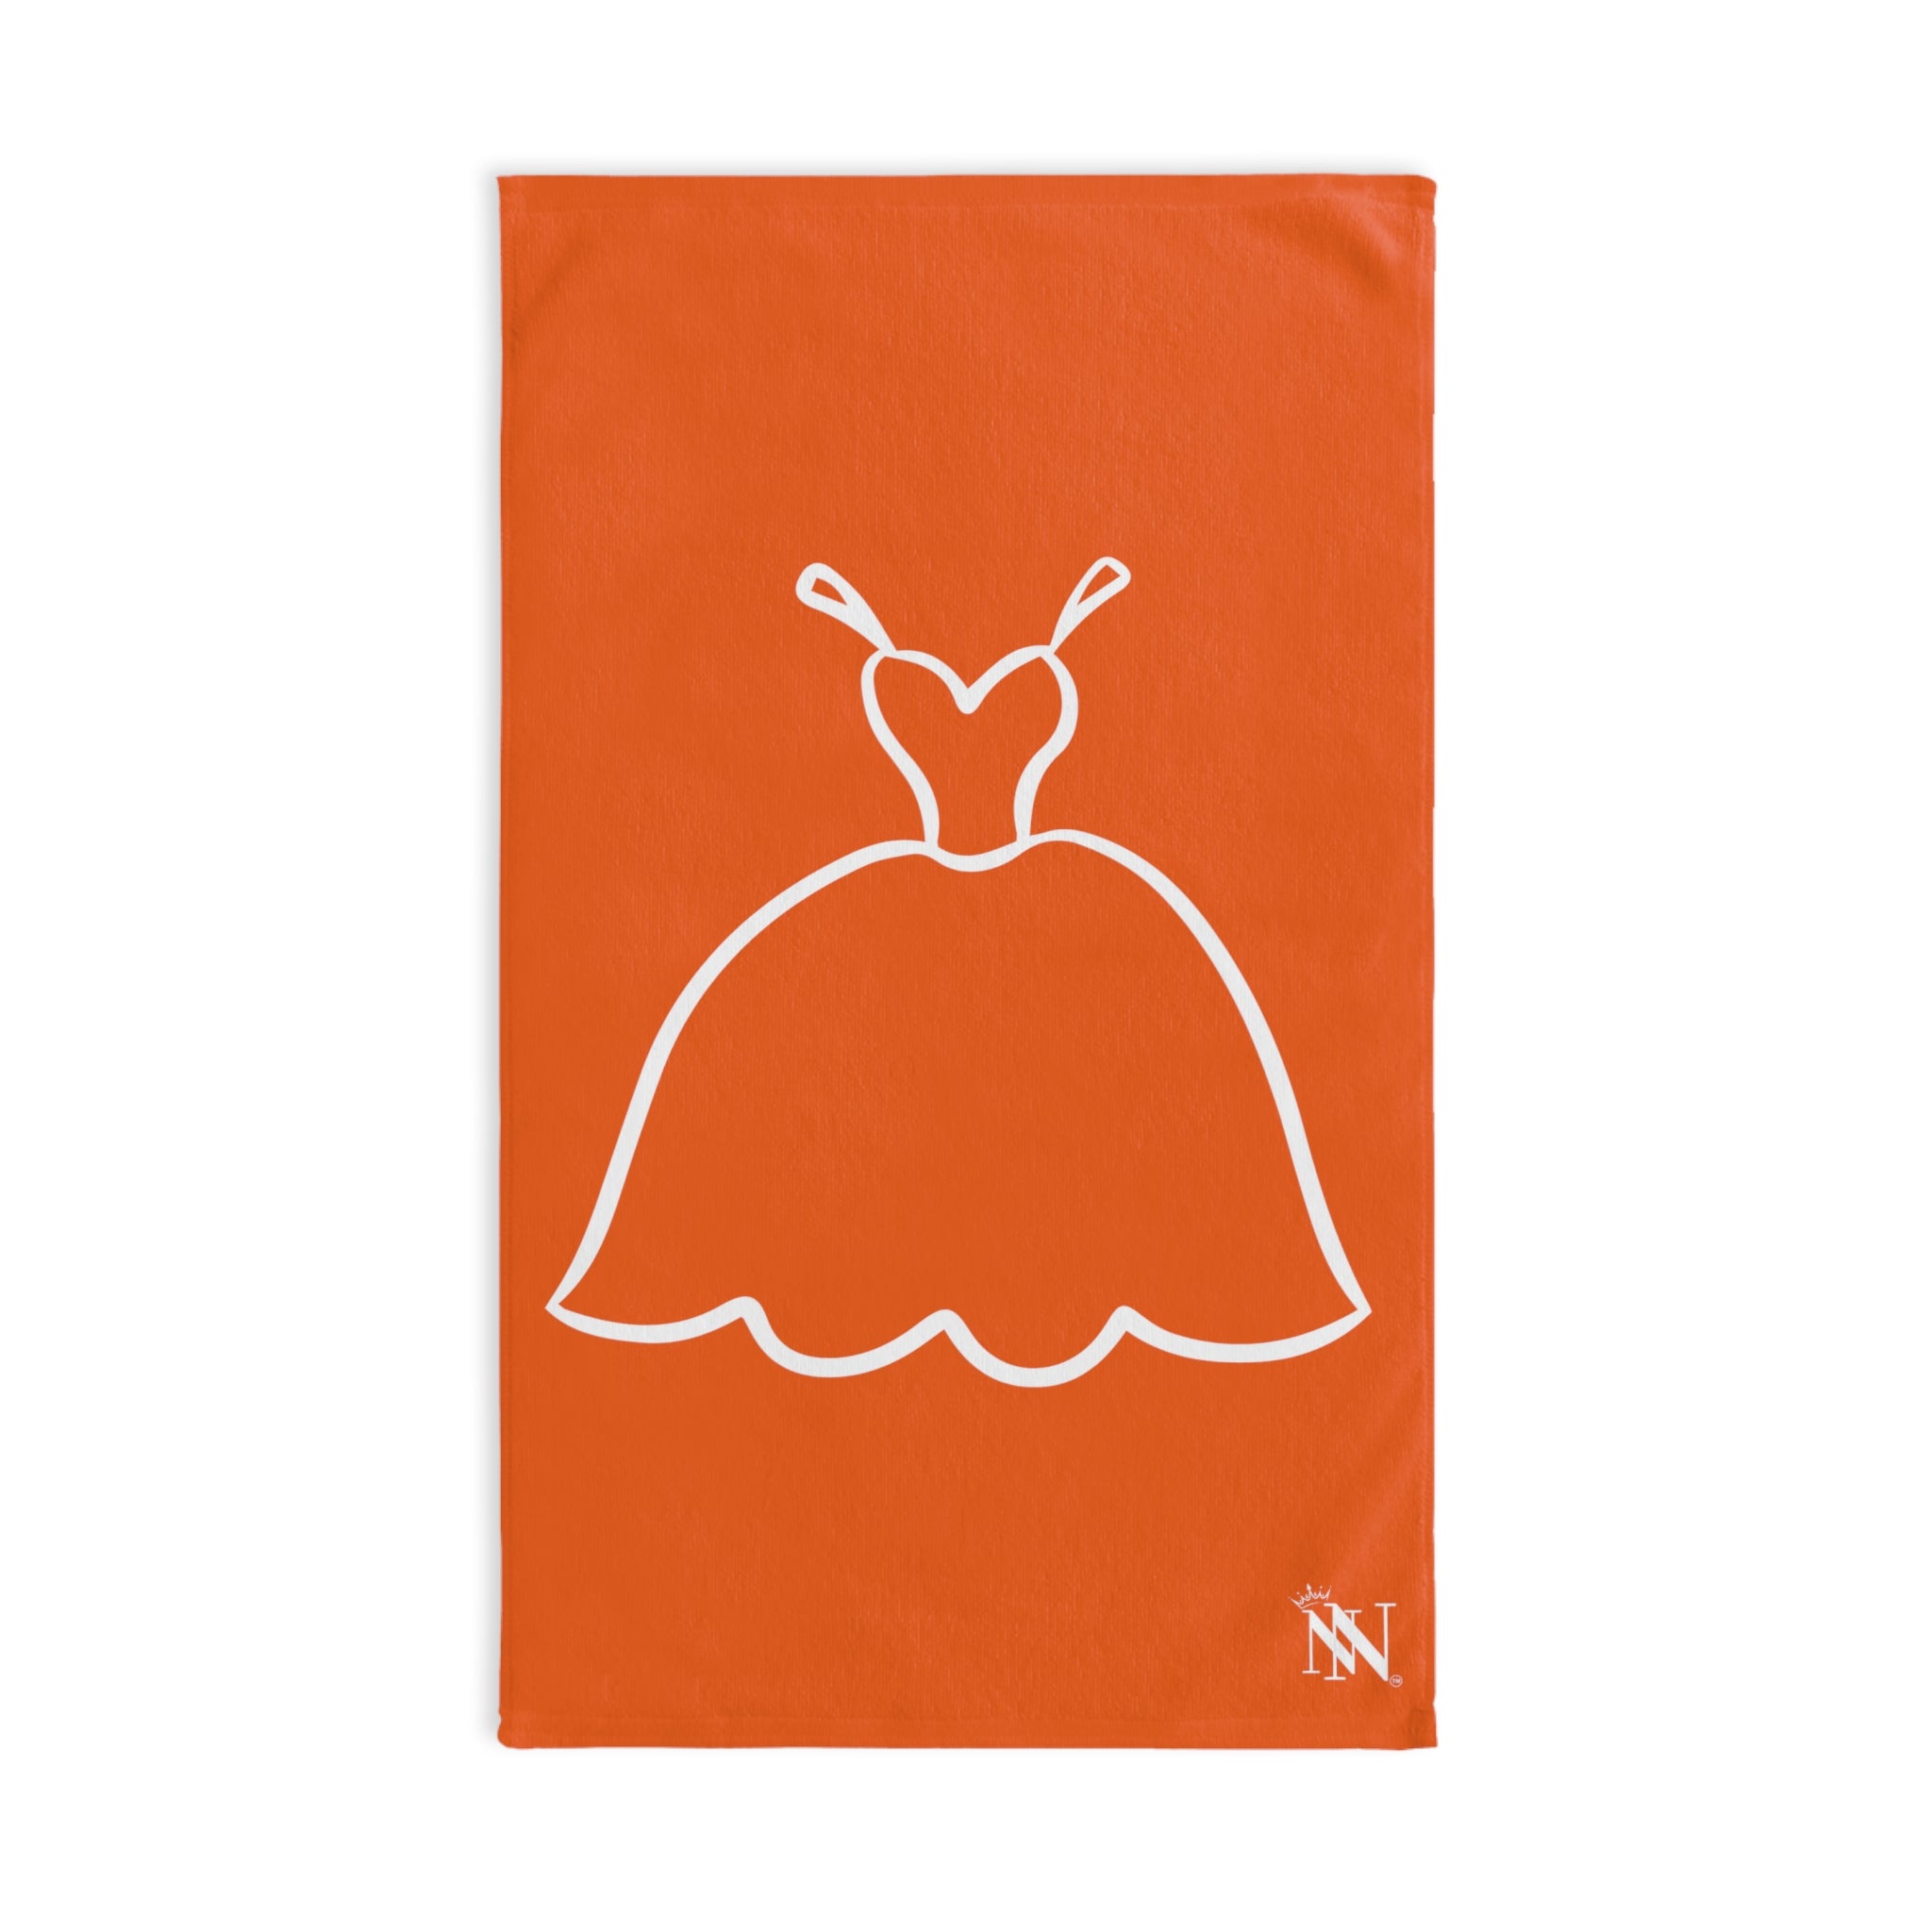 Bridal Gown Orange | Funny Gifts for Men - Gifts for Him - Birthday Gifts for Men, Him, Husband, Boyfriend, New Couple Gifts, Fathers & Valentines Day Gifts, Hand Towels NECTAR NAPKINS